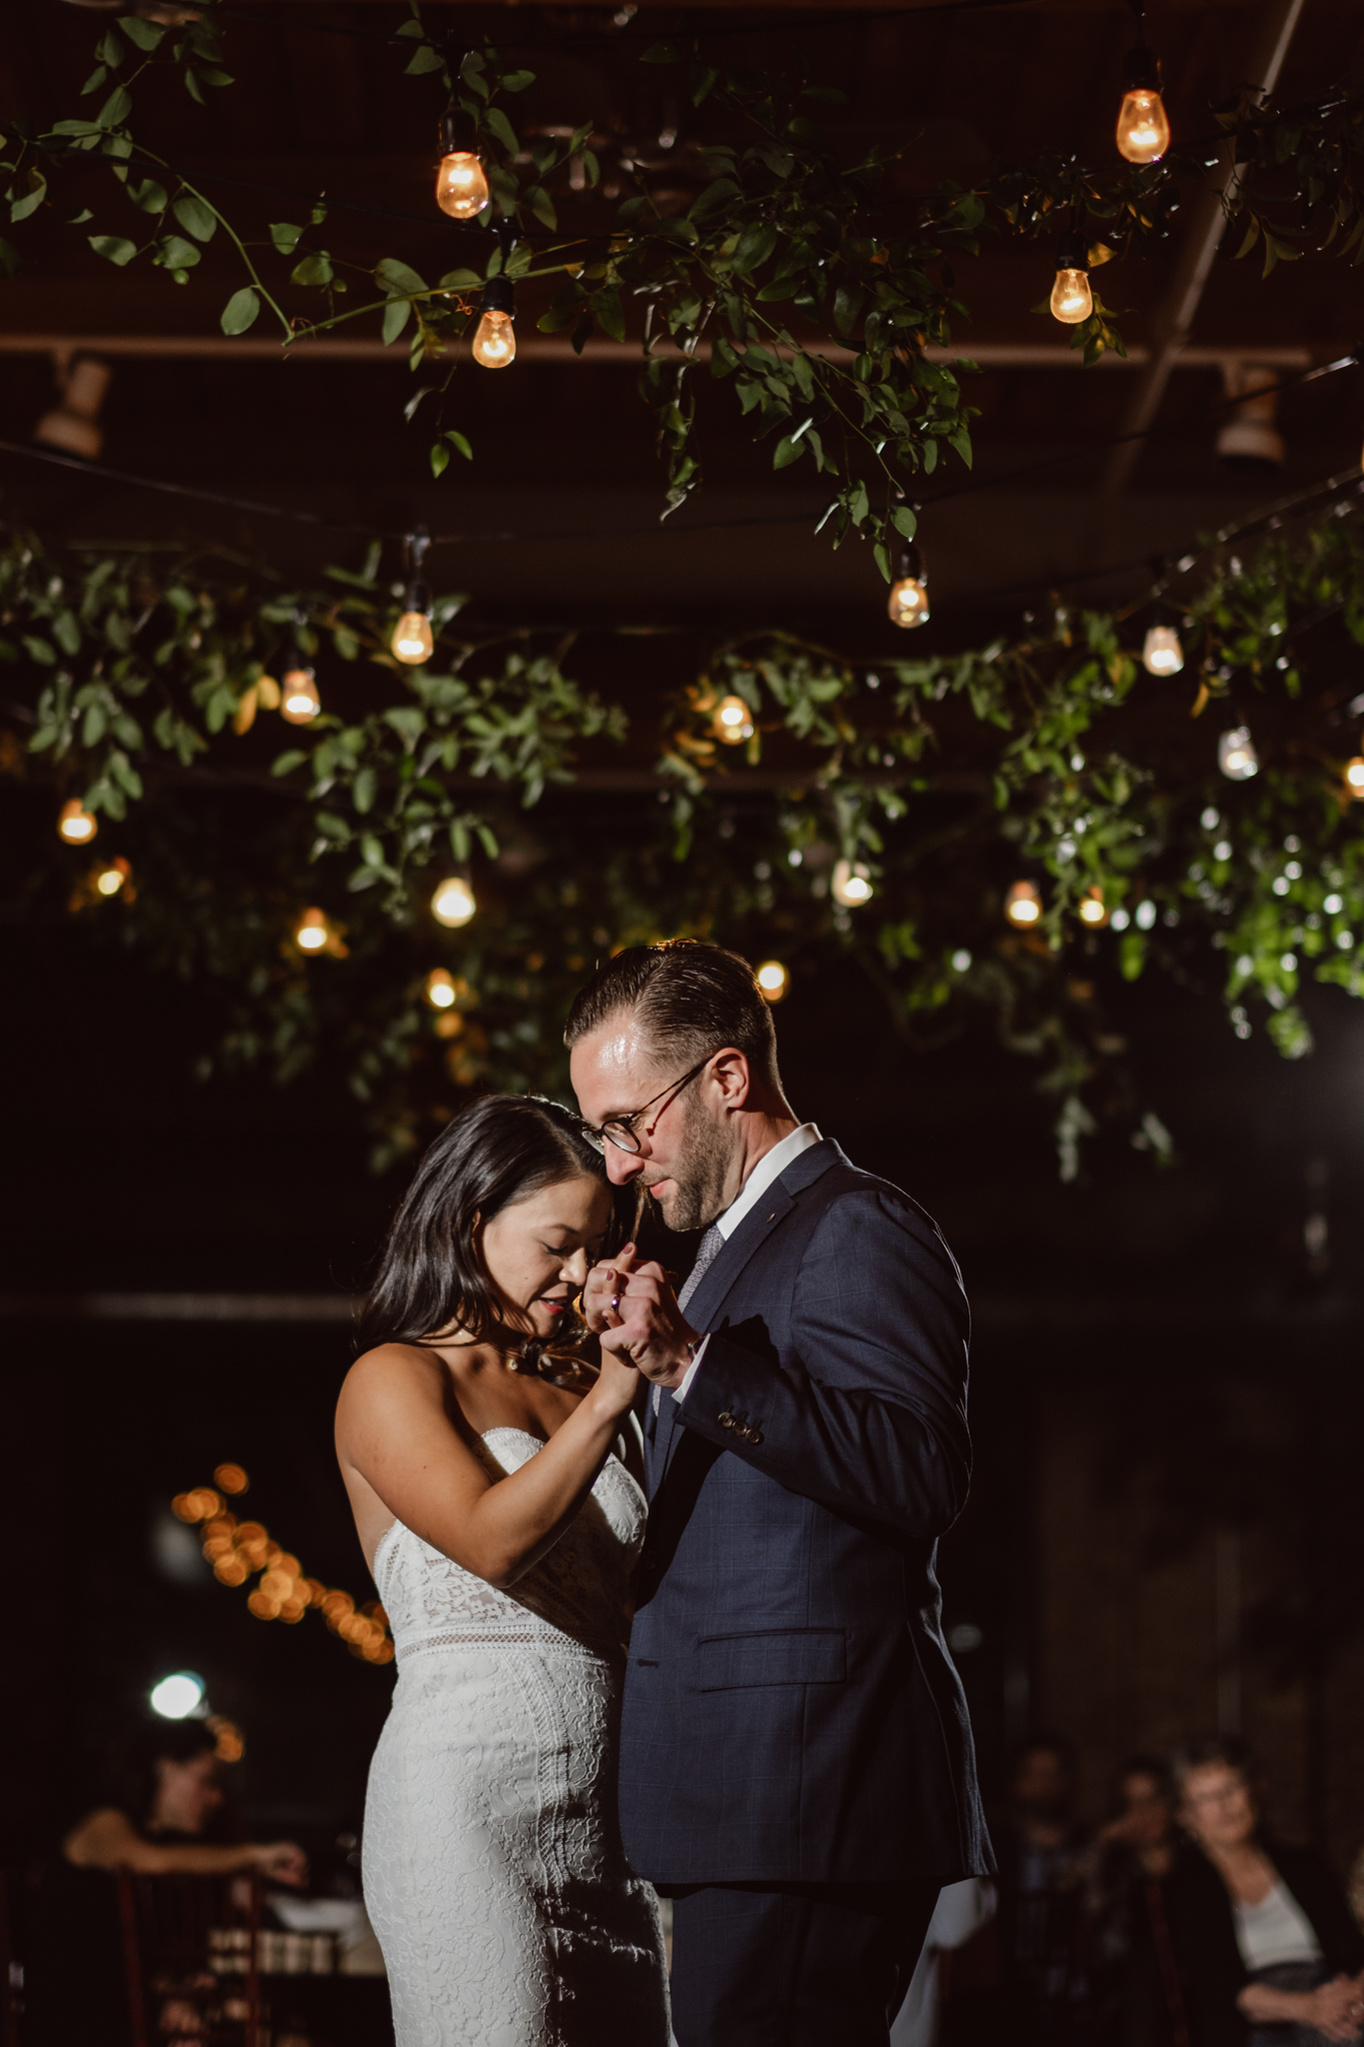 Wedding couple dances under café lights and greenery at City View Loft Chicago.  First Dance, couple holds hands as they slow dance.